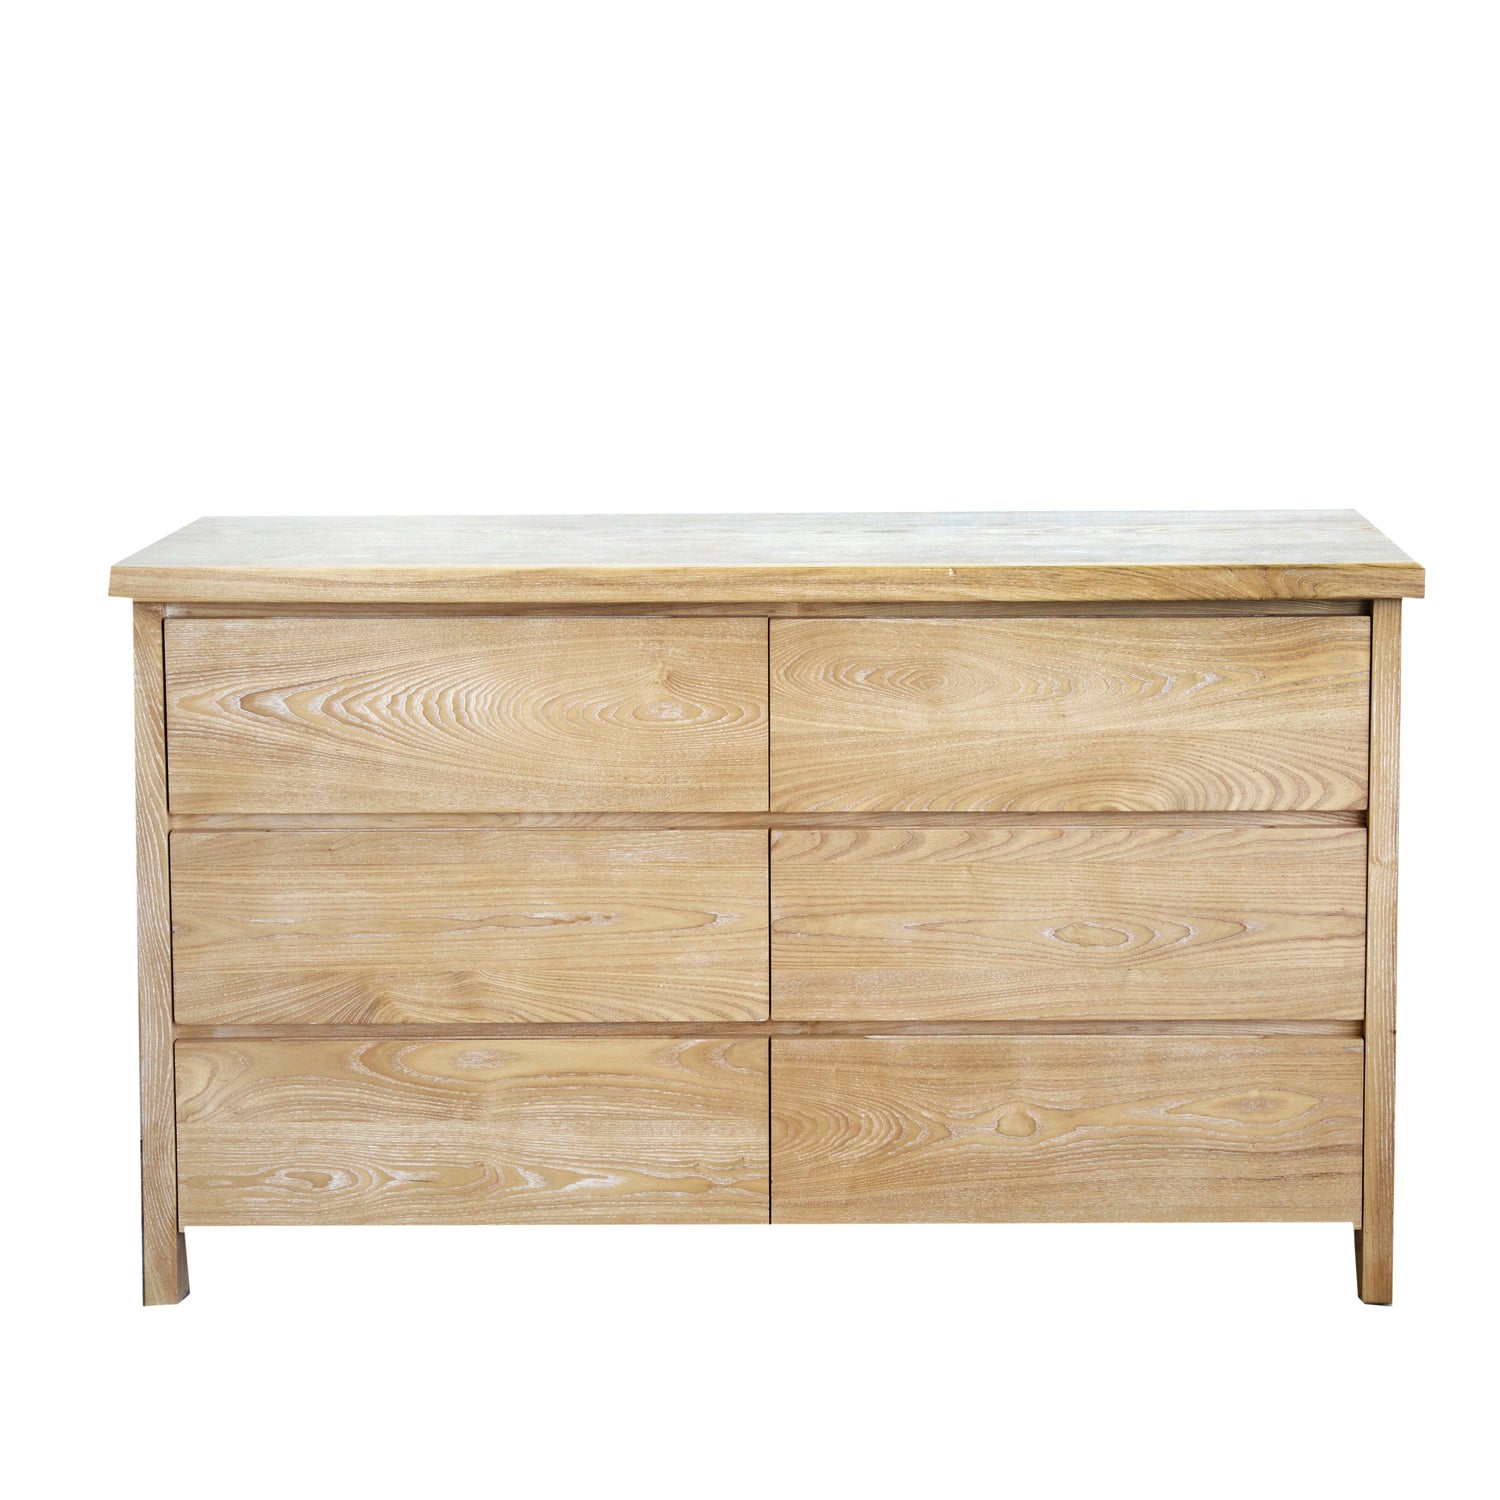 Newport Chest of Drawers L1600mm Bedroom Furniture Beachwood Designs Limed Ash 